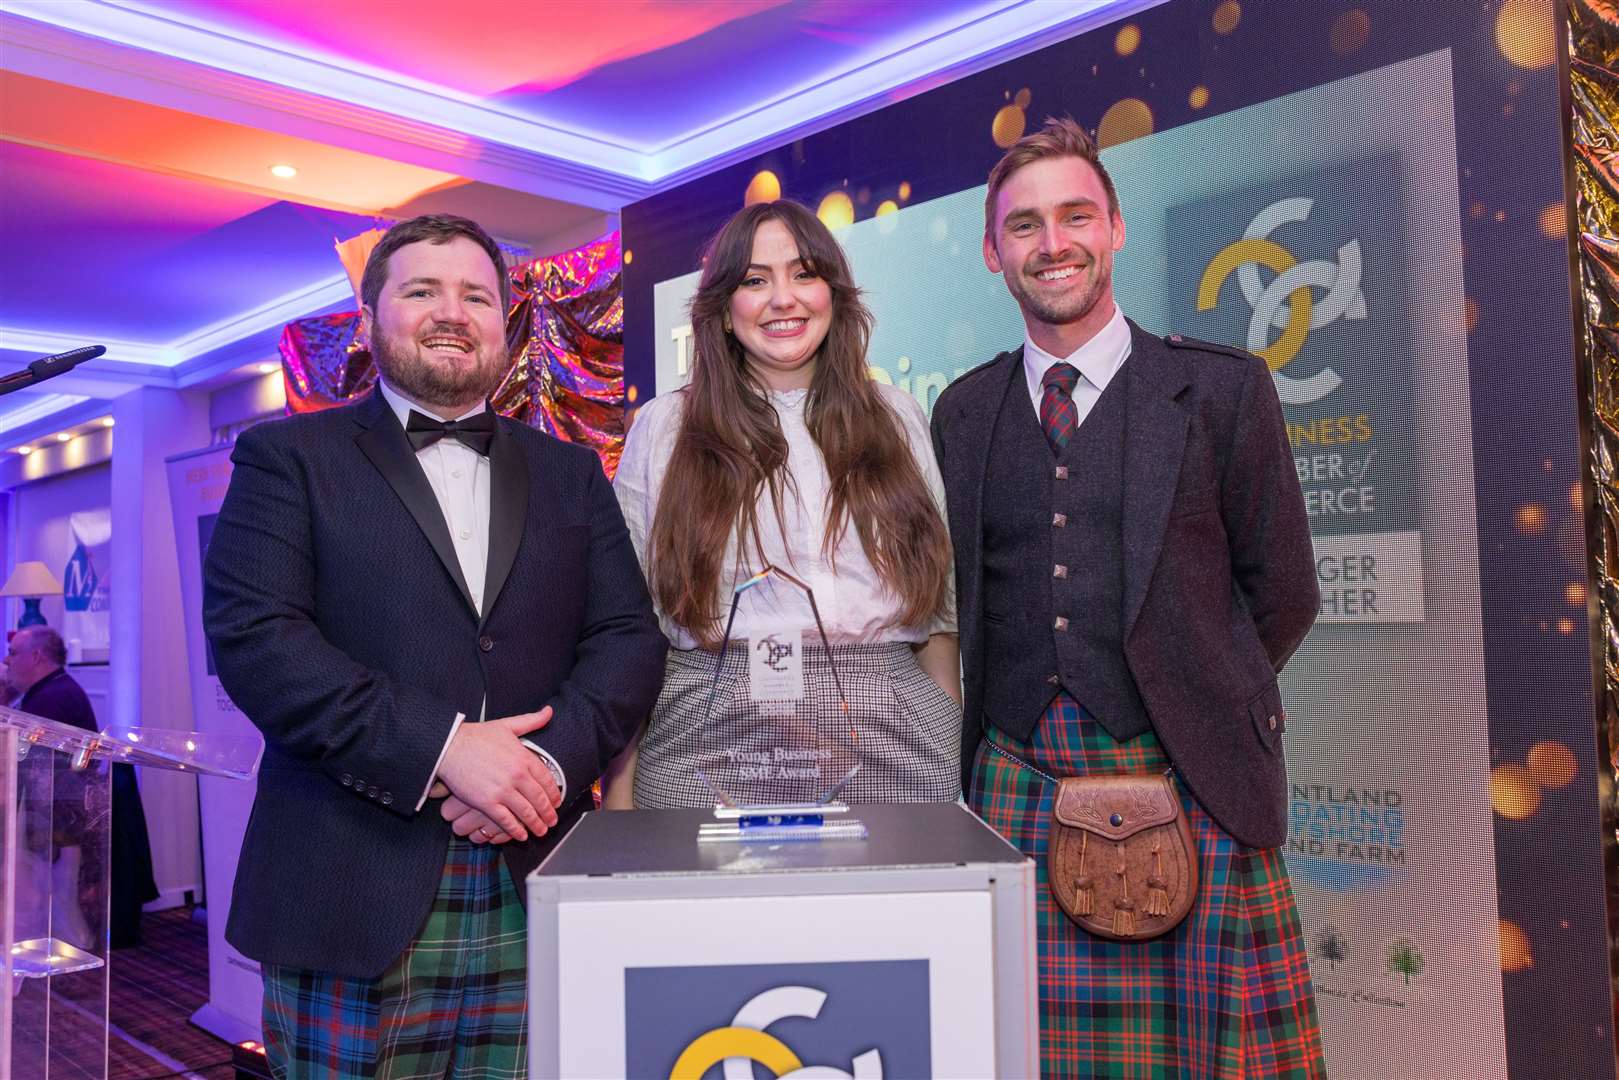 North Point Distillery co-Founder Struan Mackie and distillery manager Heather Ricker collect the young business award in the SME category from Isaac Connell (right), of award sponsor Pentland Floating Offshore Windfarm.